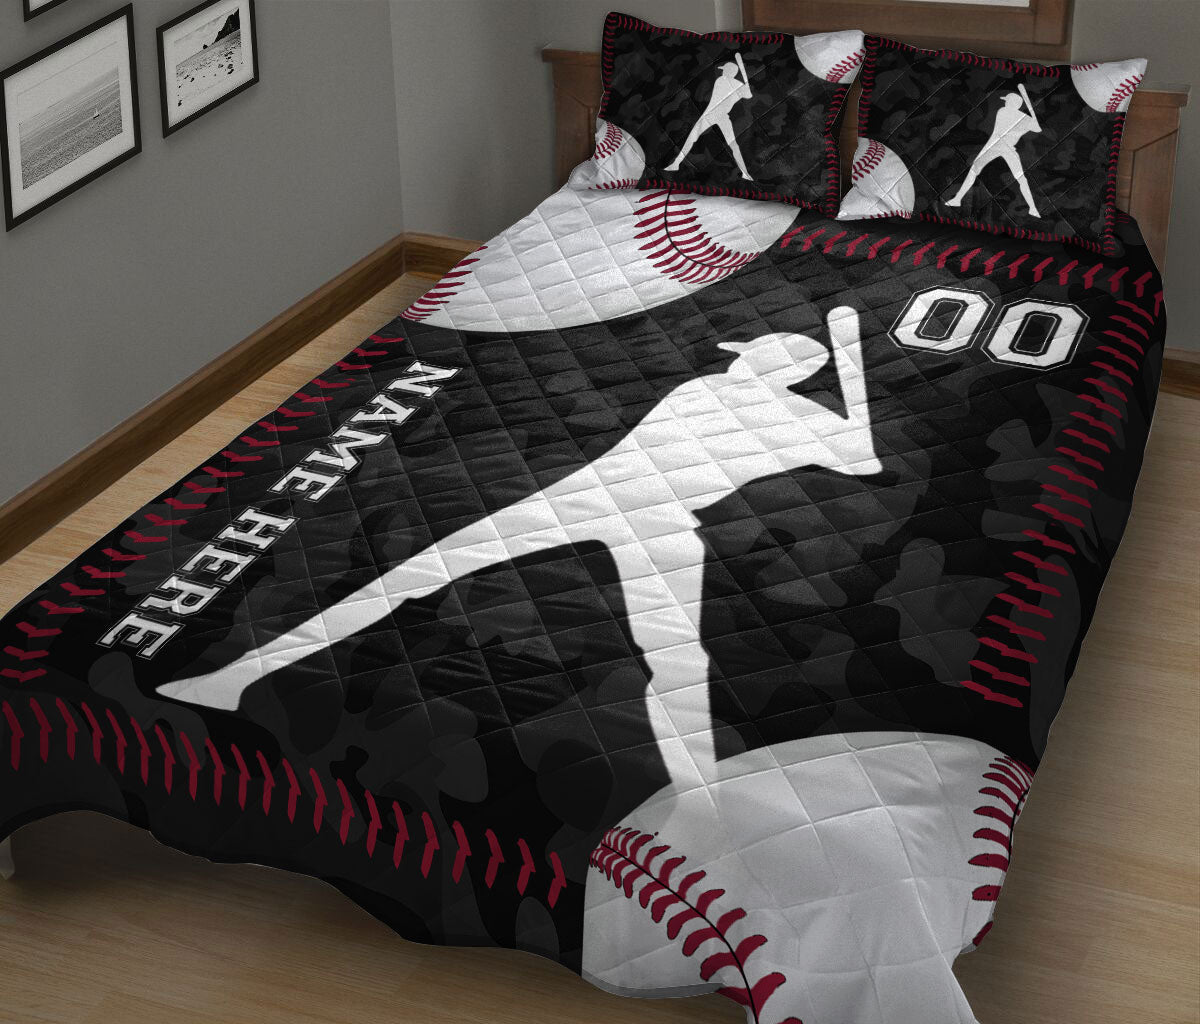 Ohaprints-Quilt-Bed-Set-Pillowcase-Baseball-Player-Black-Camo-Ball-Pattern-Sports-Gift-Custom-Personalized-Name-Number-Blanket-Bedspread-Bedding-3006-King (90'' x 100'')